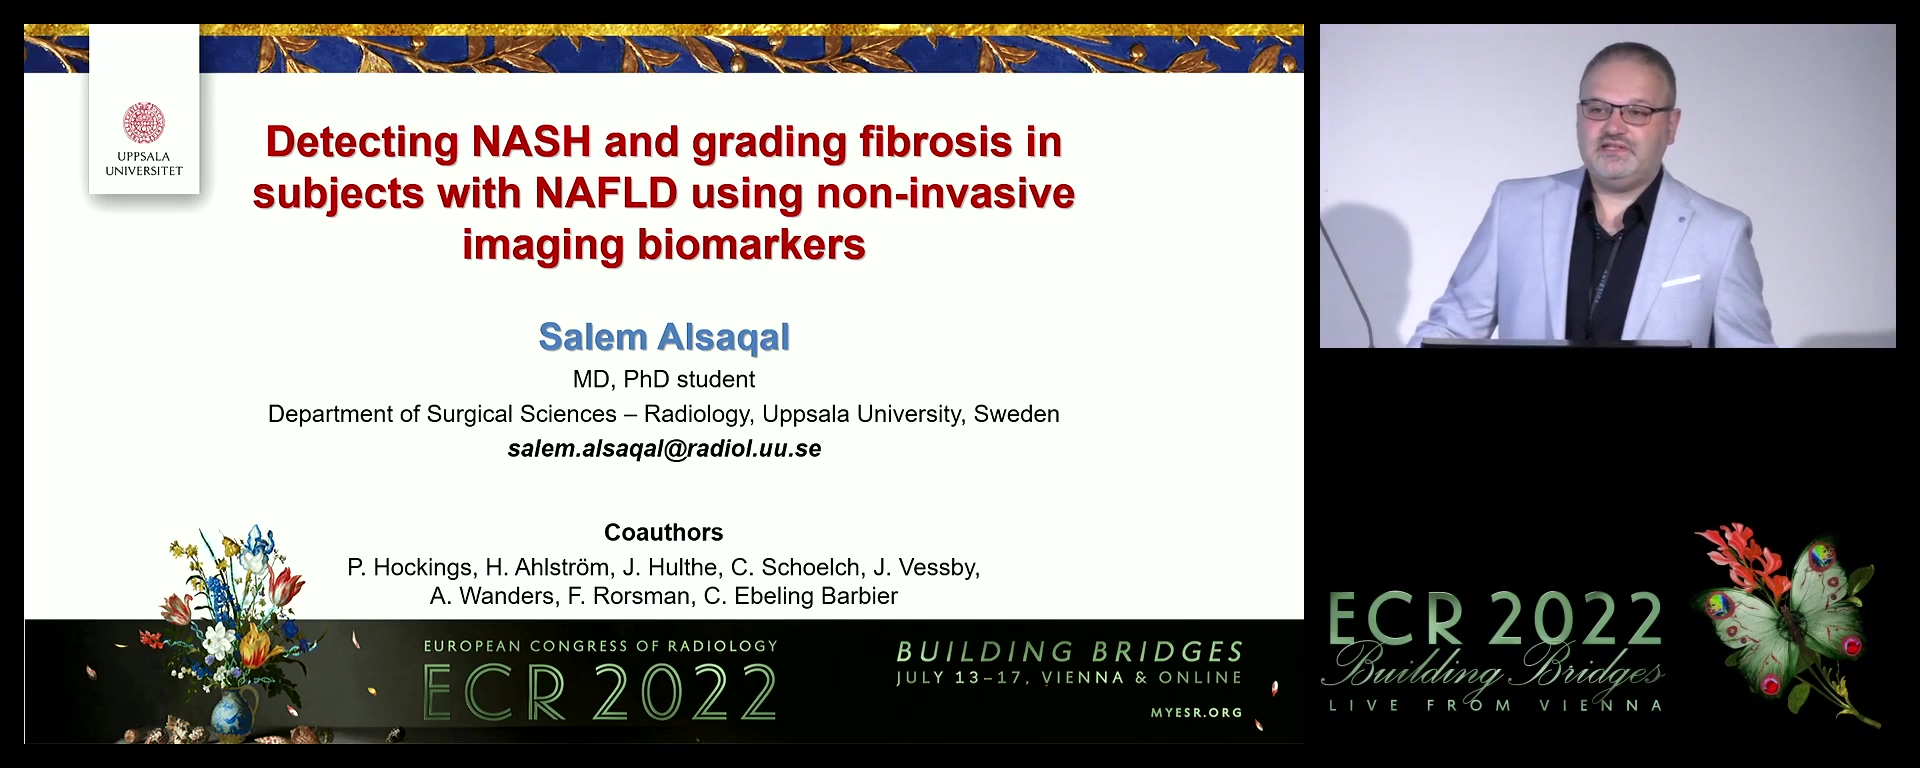 Detecting NASH and grading fibrosis in subjects with NAFLD using non-invasive imaging biomarkers - Salem Alsaqal, Uppsala / SE